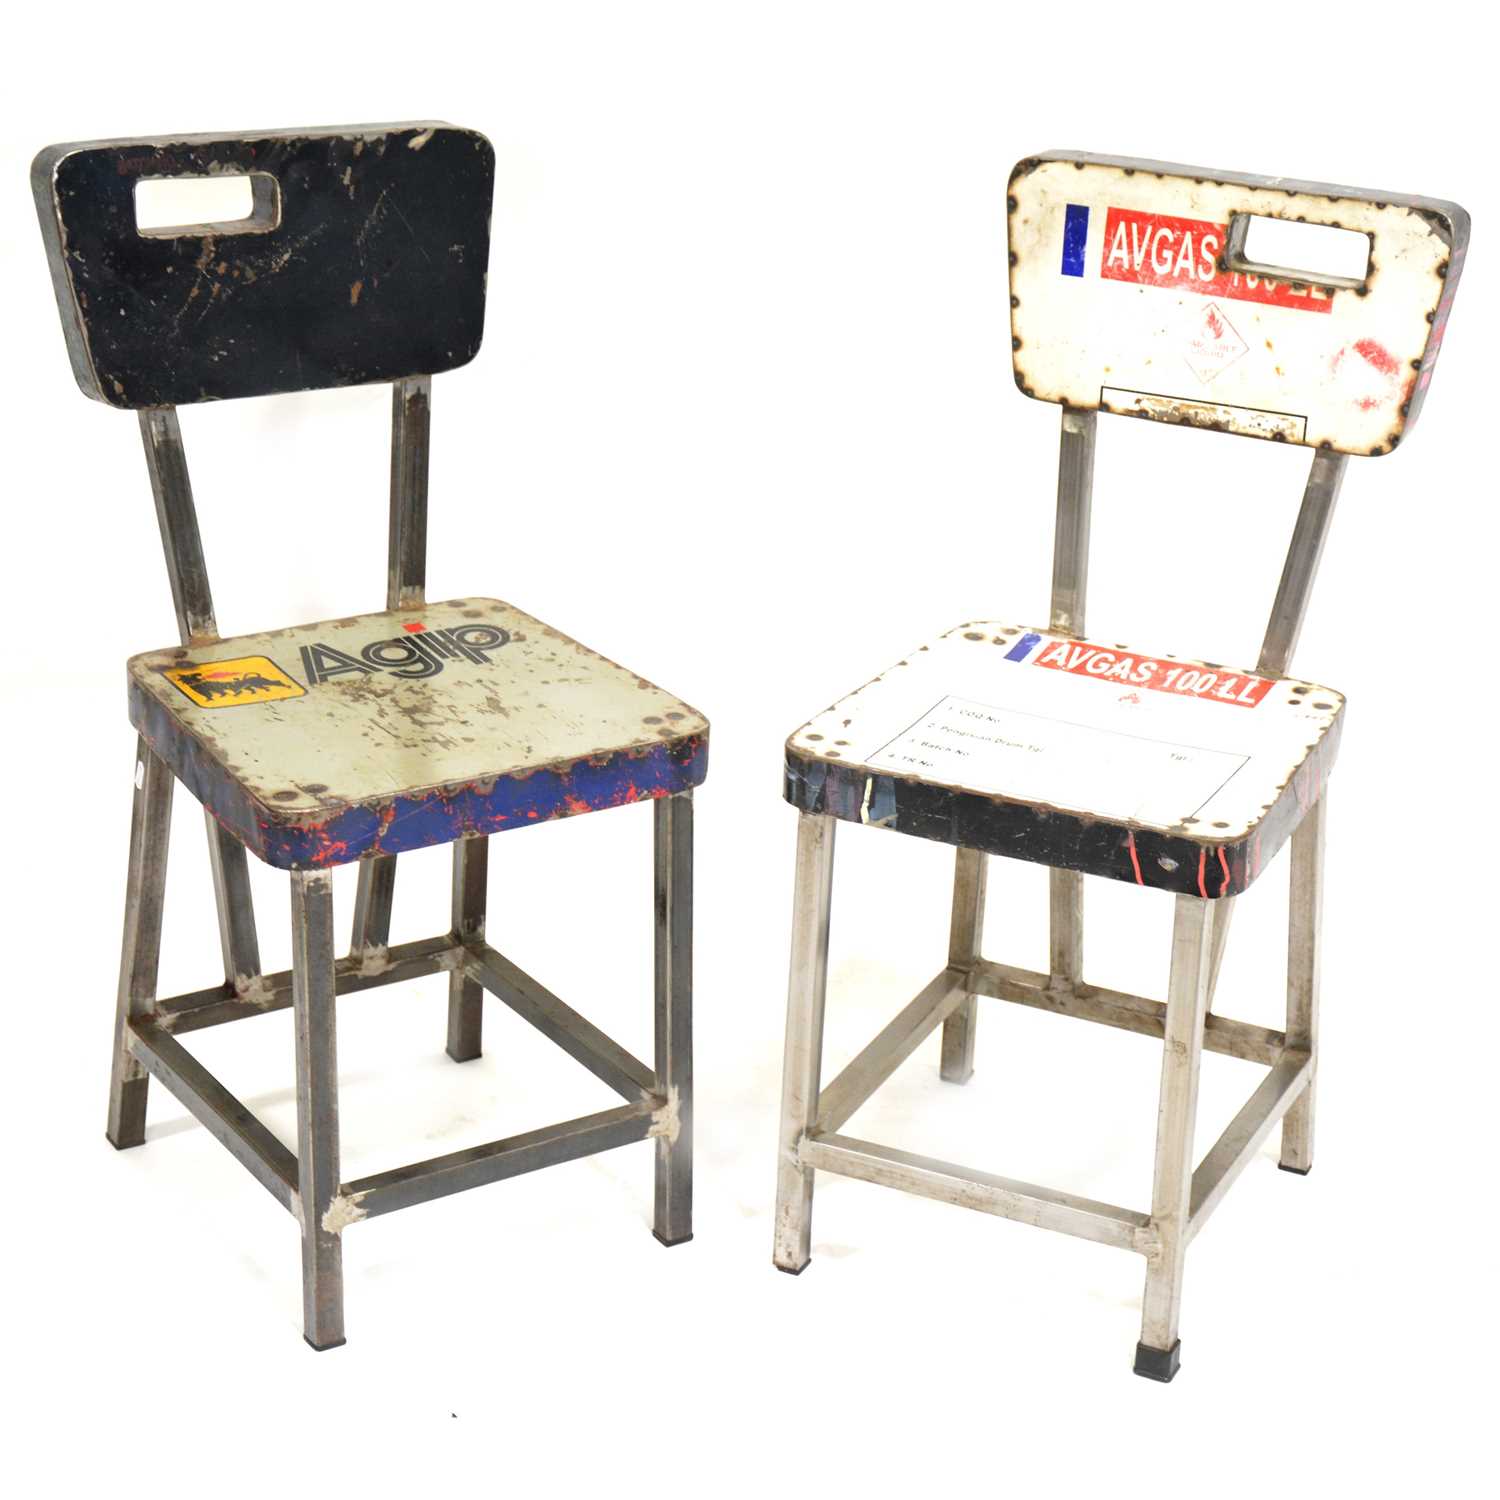 Pair of modern "industrial" metal chairs, with motorsport decals